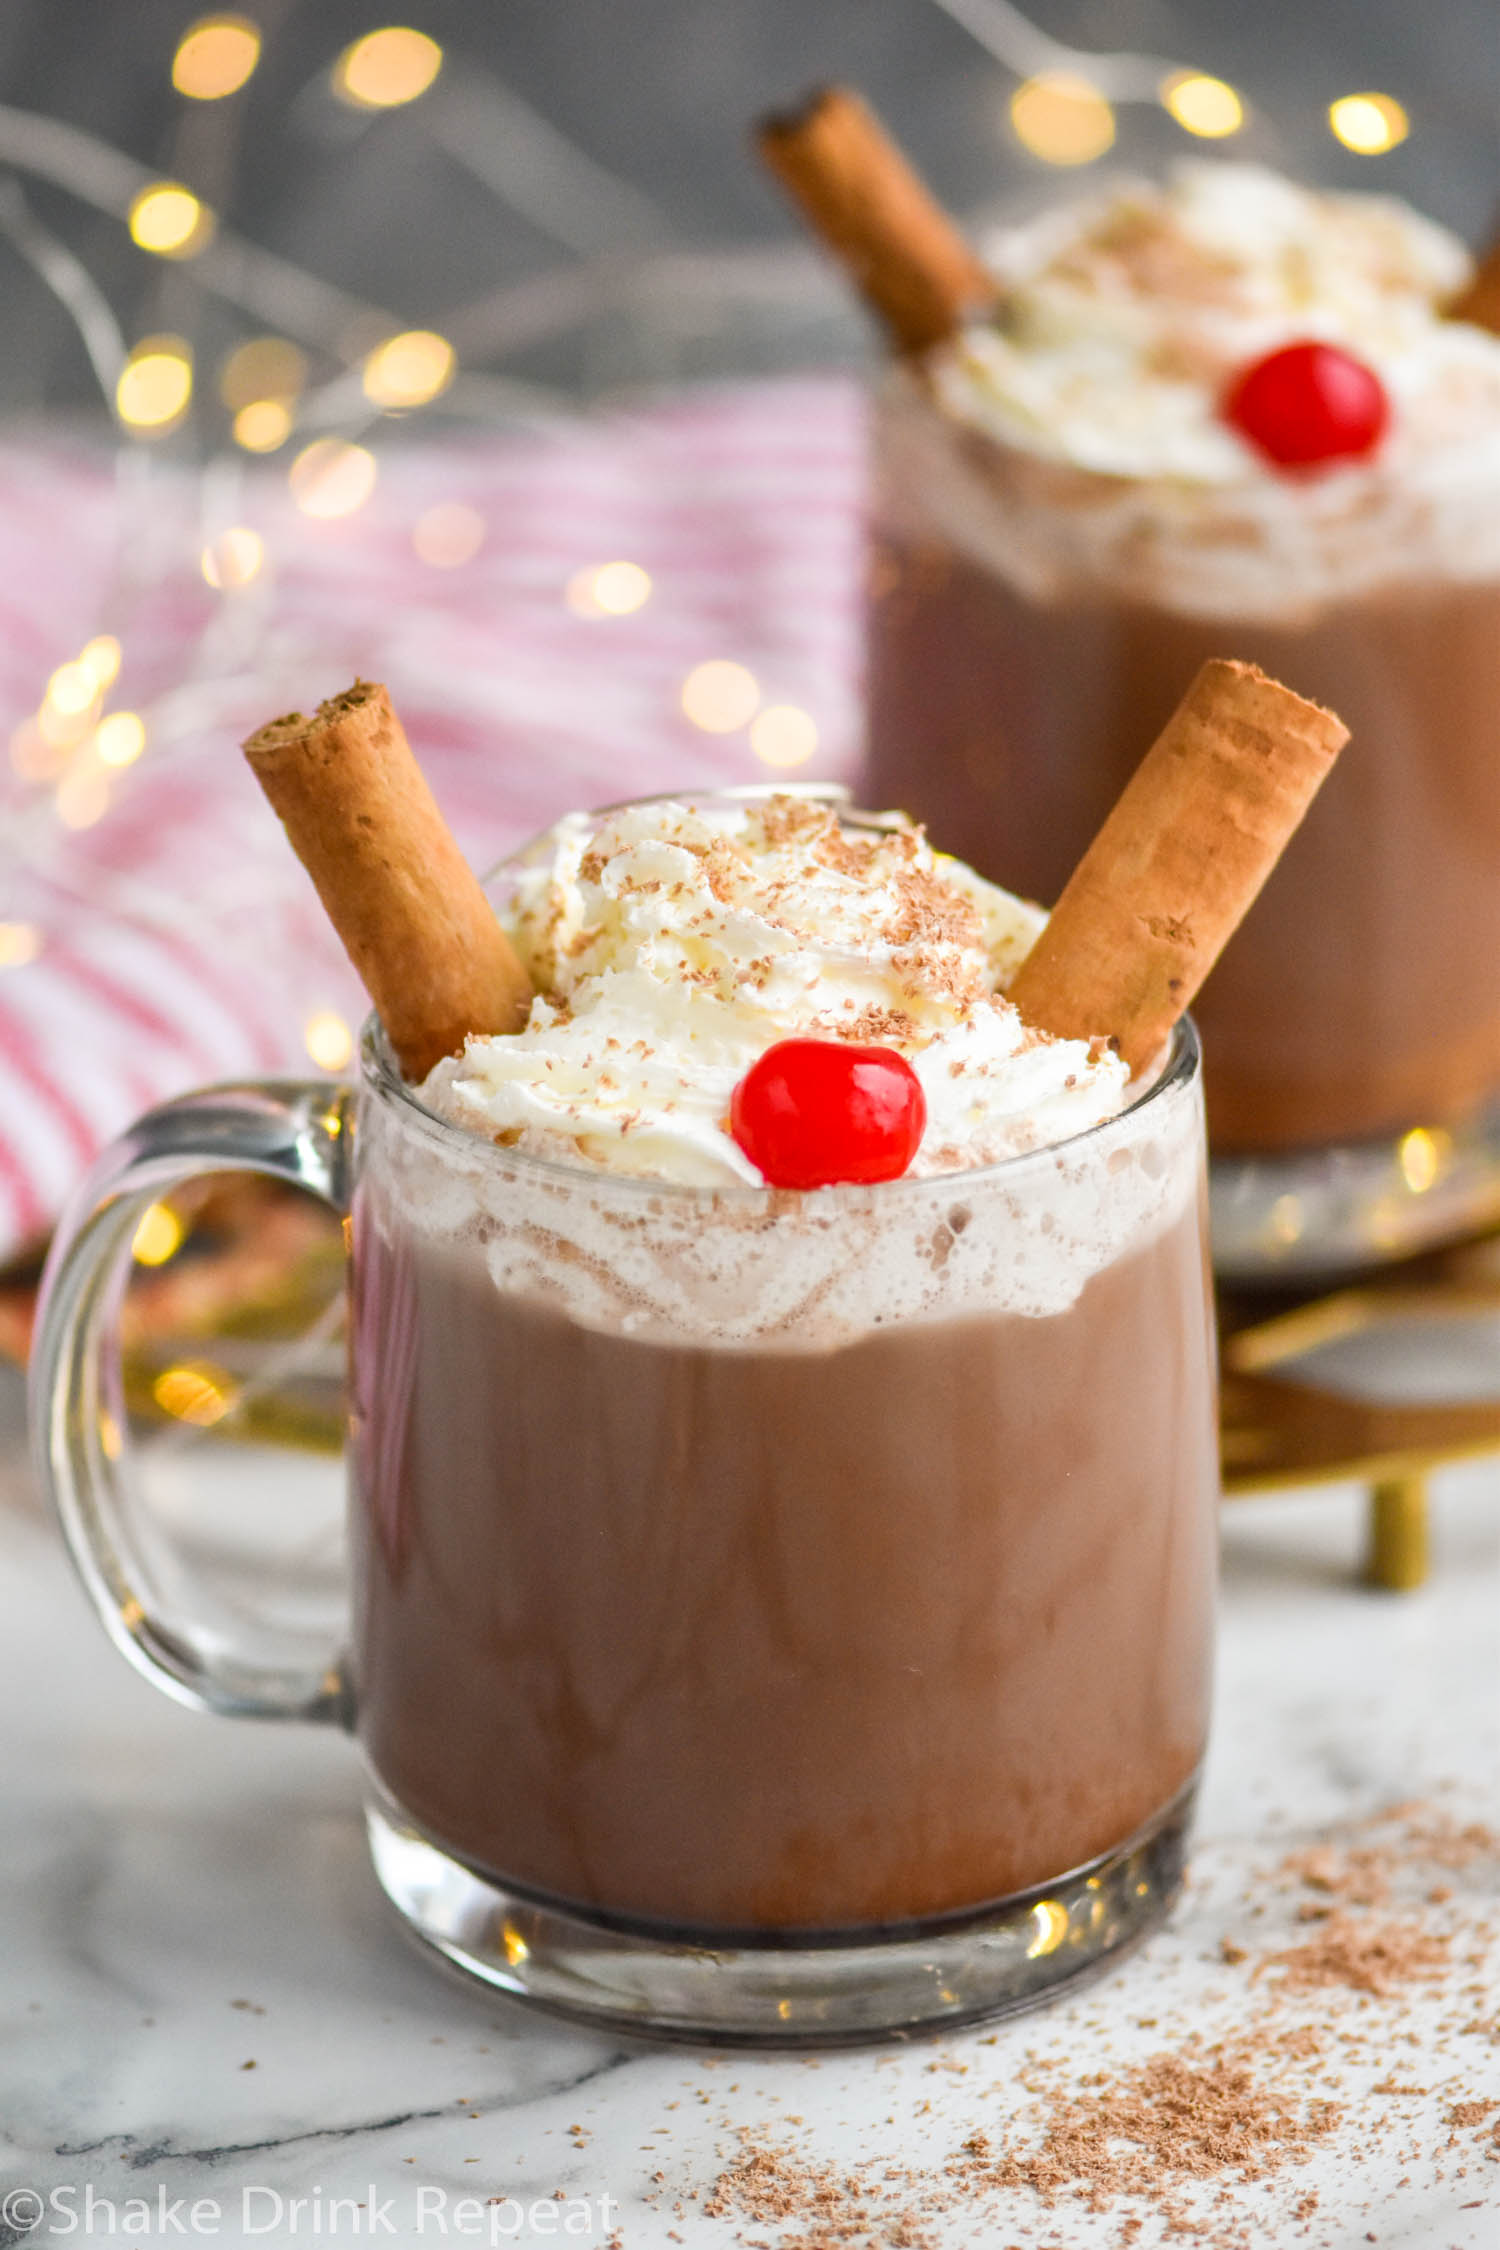 two mugs of Drunk Reindeer recipe garnished with whipped cream, cinnamon sticks, a cherry, and chocolate shavings